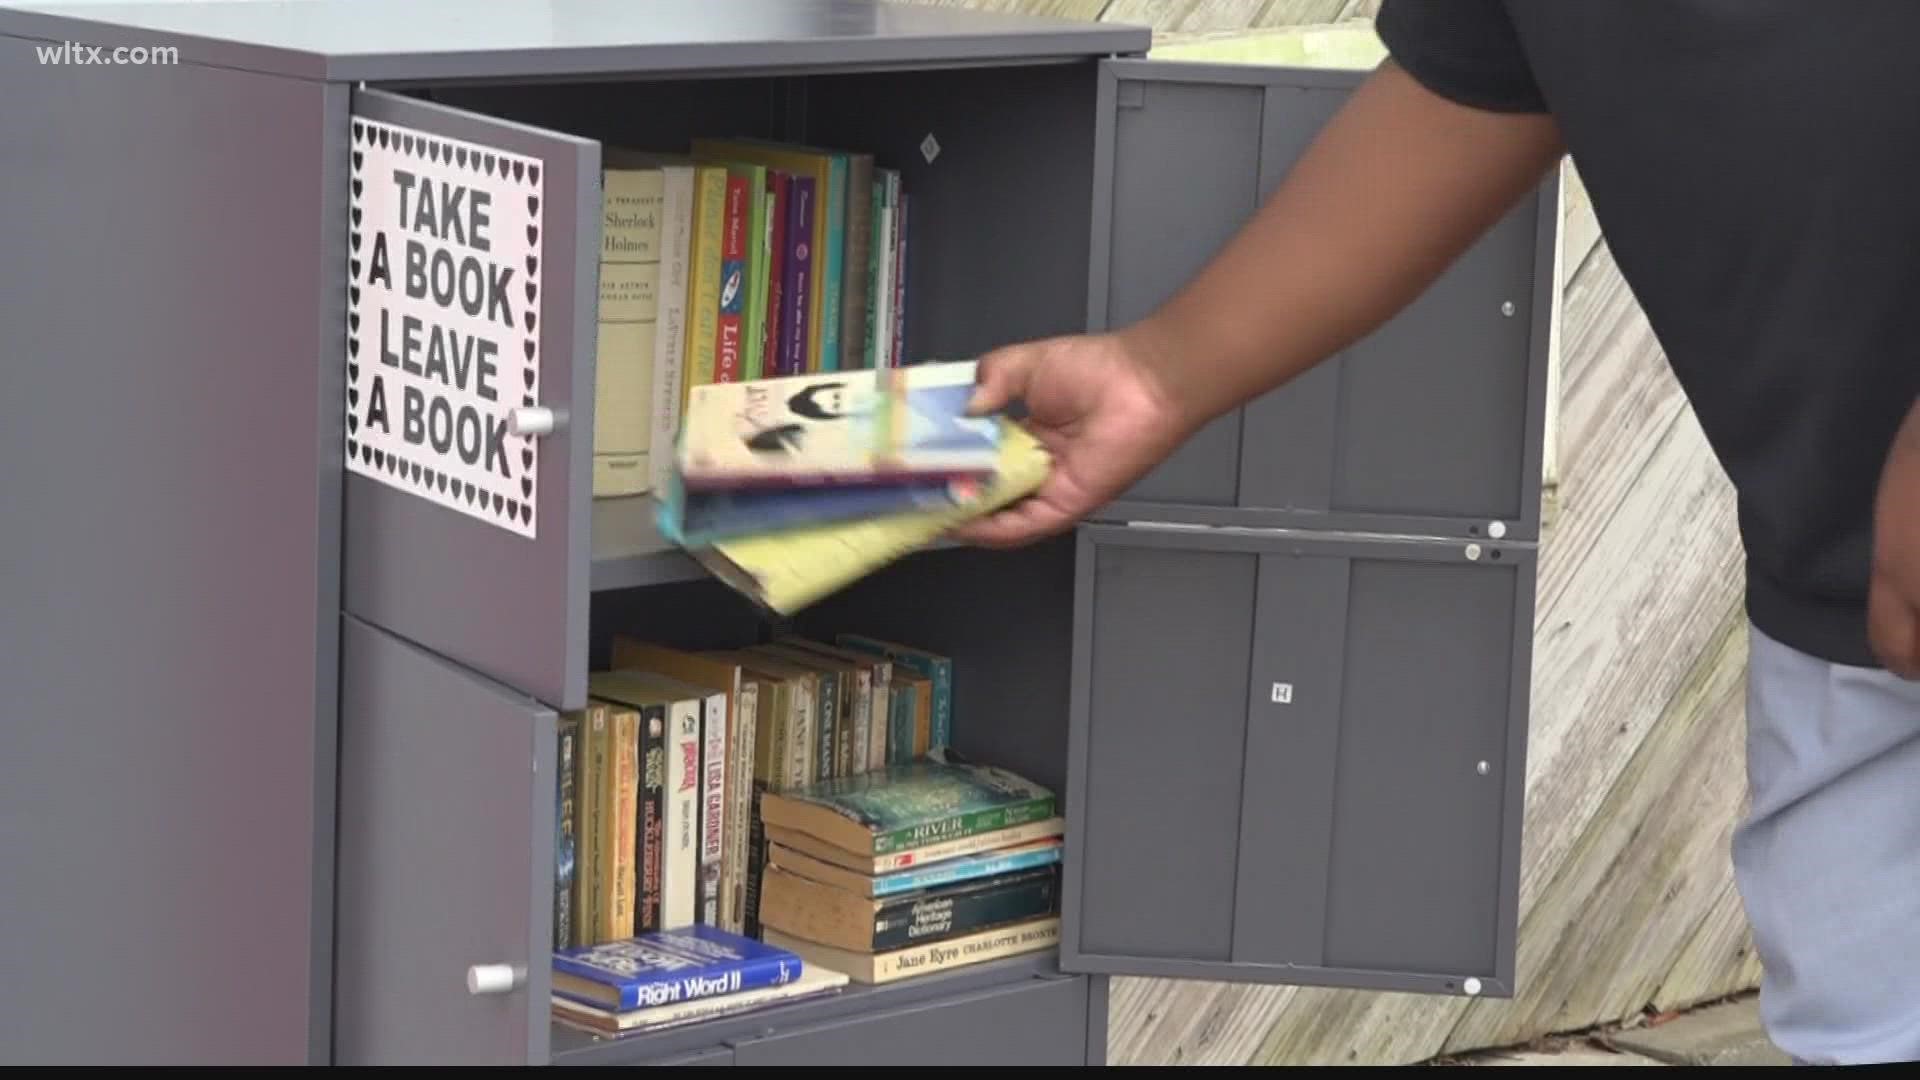 For decades, there's been a push to have a library in Summerton. Now, one resident has decided to take matters into her own hands.